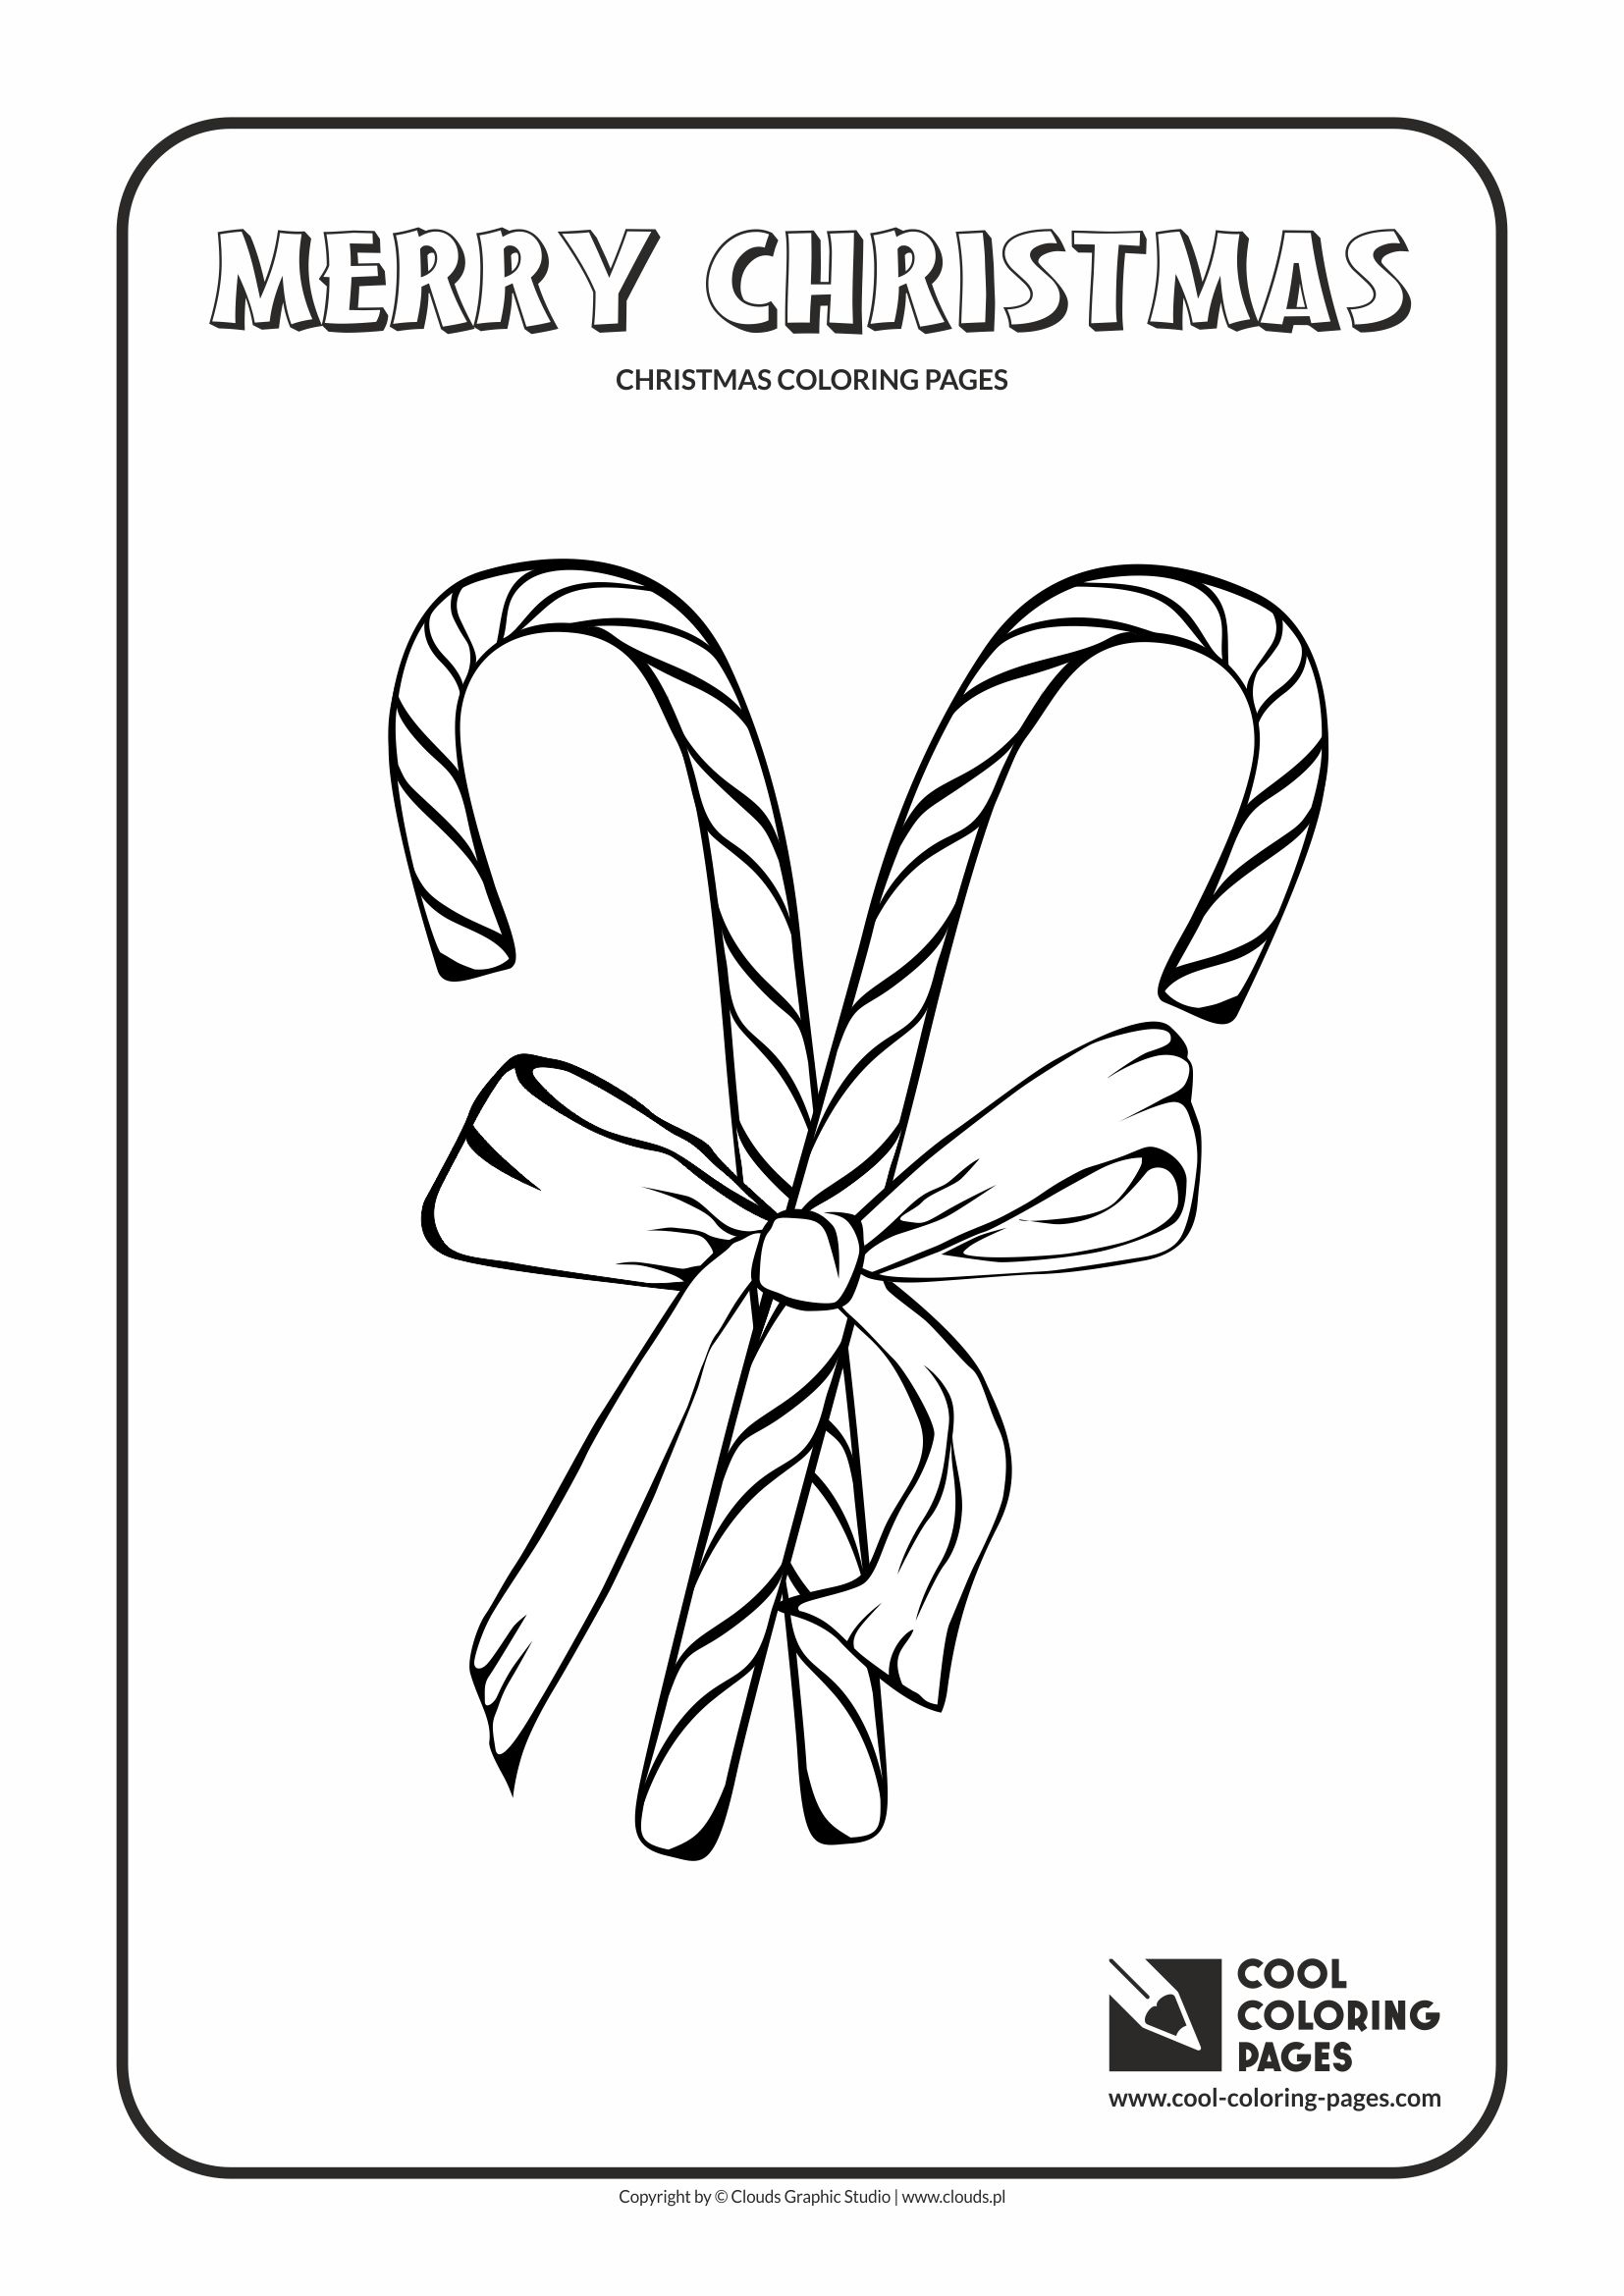 Cool Coloring Pages - Holidays / Candy canes / Coloring page with candy canes